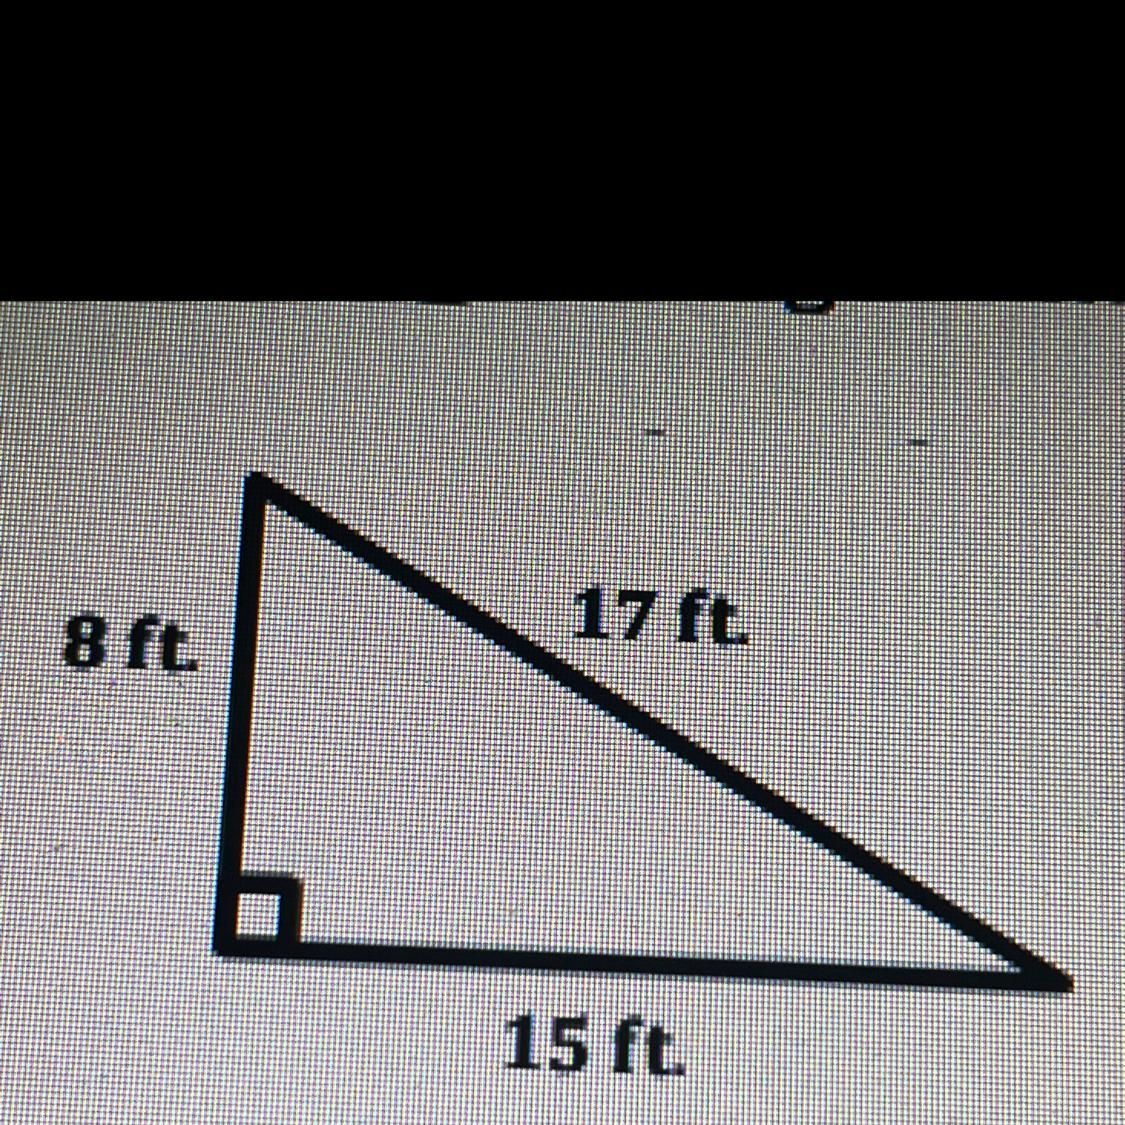 17 Ft.8 Ft.15 Ft.What Is The Area Of The Triangle Above?